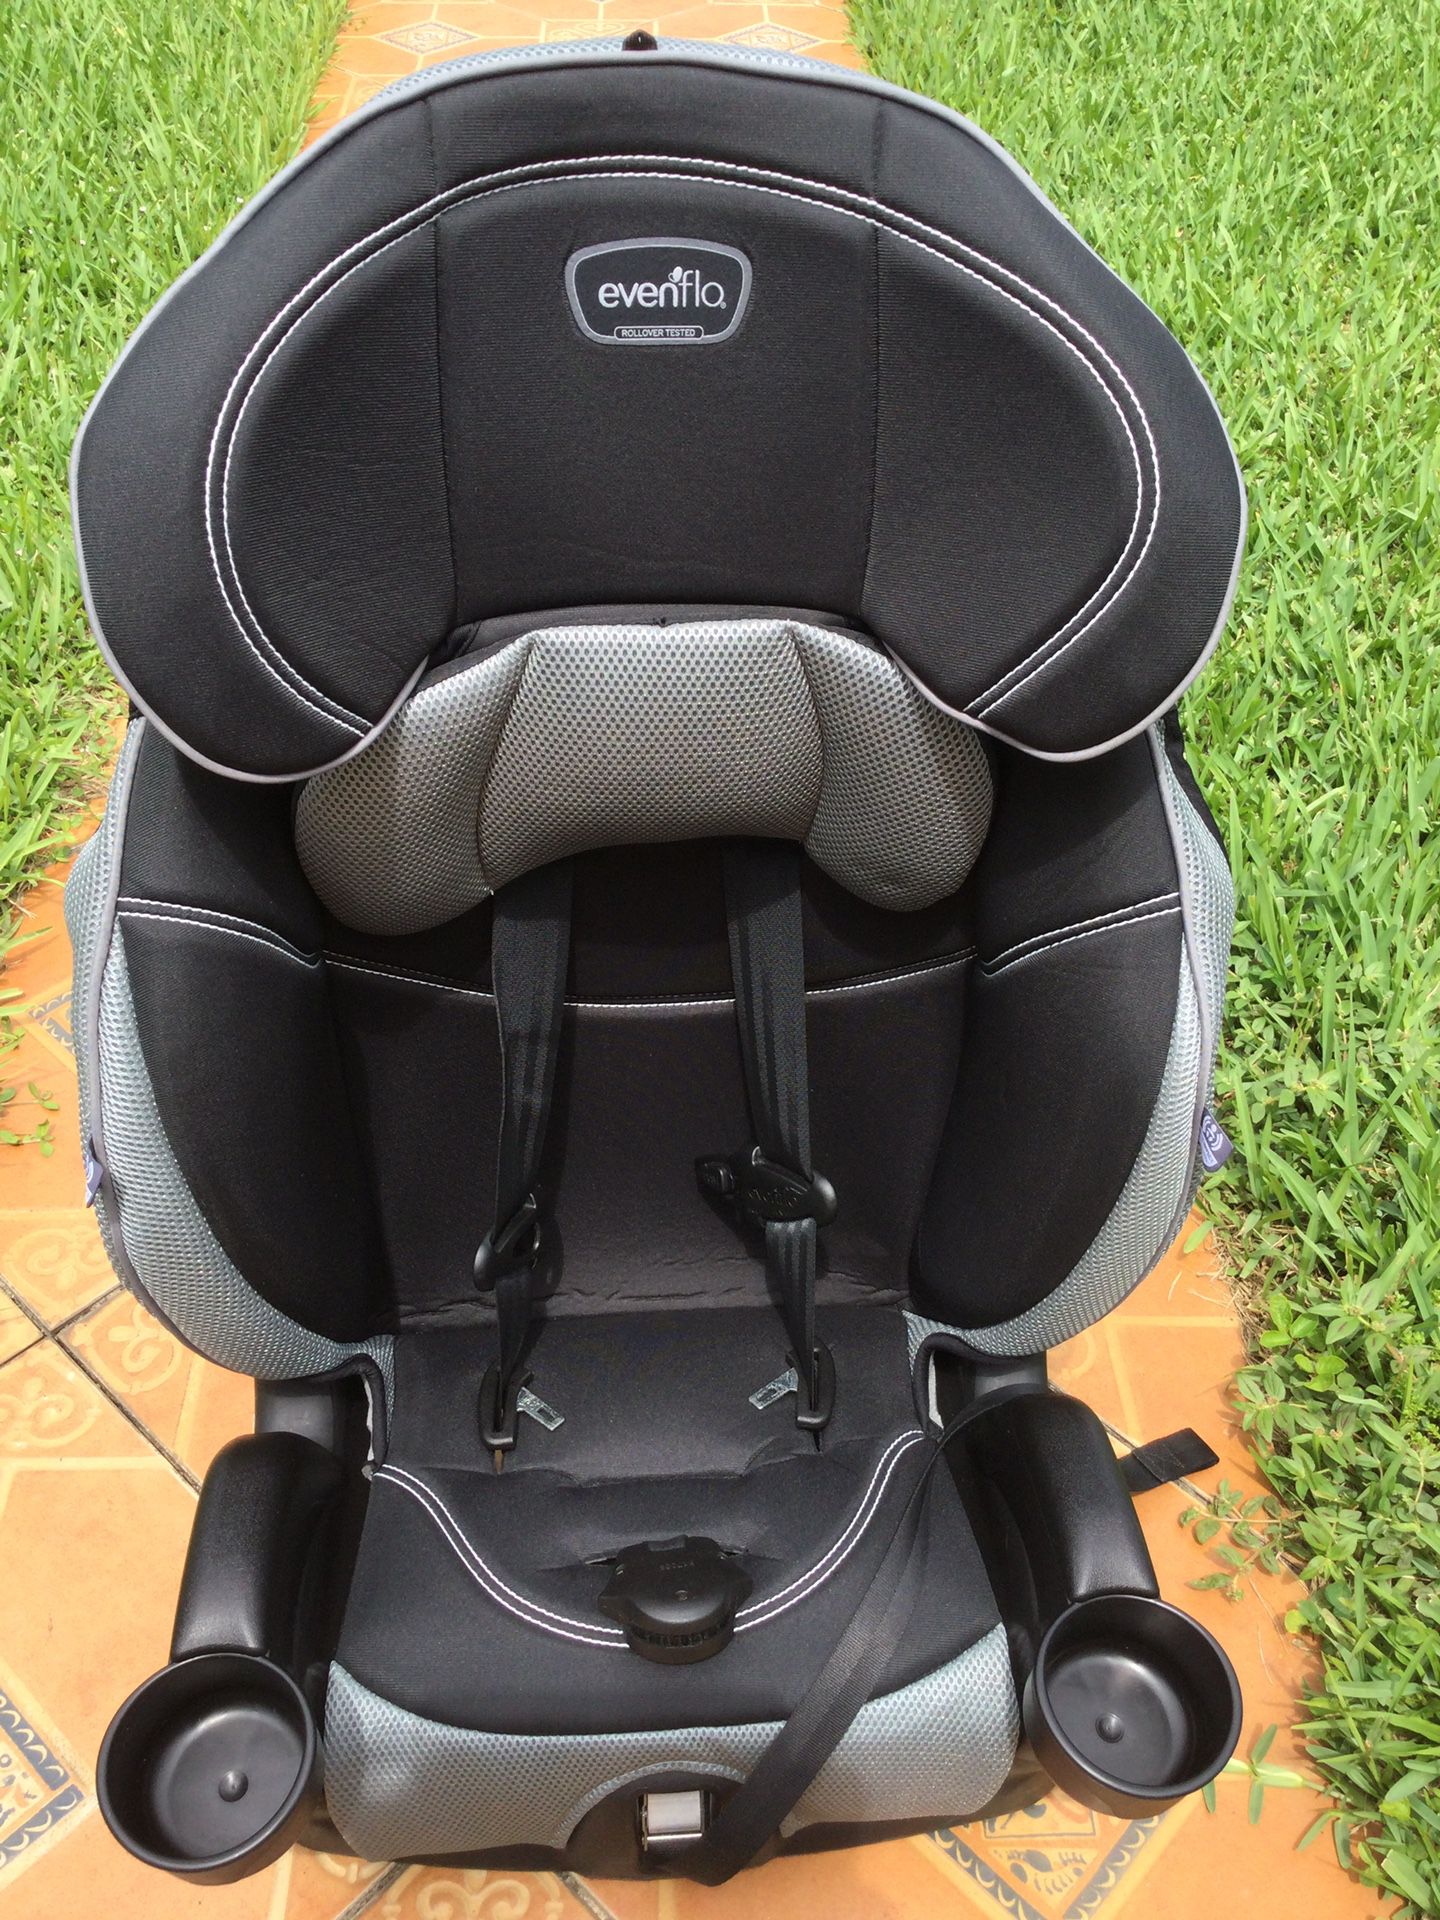  EVENFLO  CHASE LX HARNESSED BOOSTER CAR SEAT *CHECK PICTURE AND MY OFFERS PLEASE * ( READ DESCRIPTION  PLEASE ) SERIOUS BUYERS PLEASE